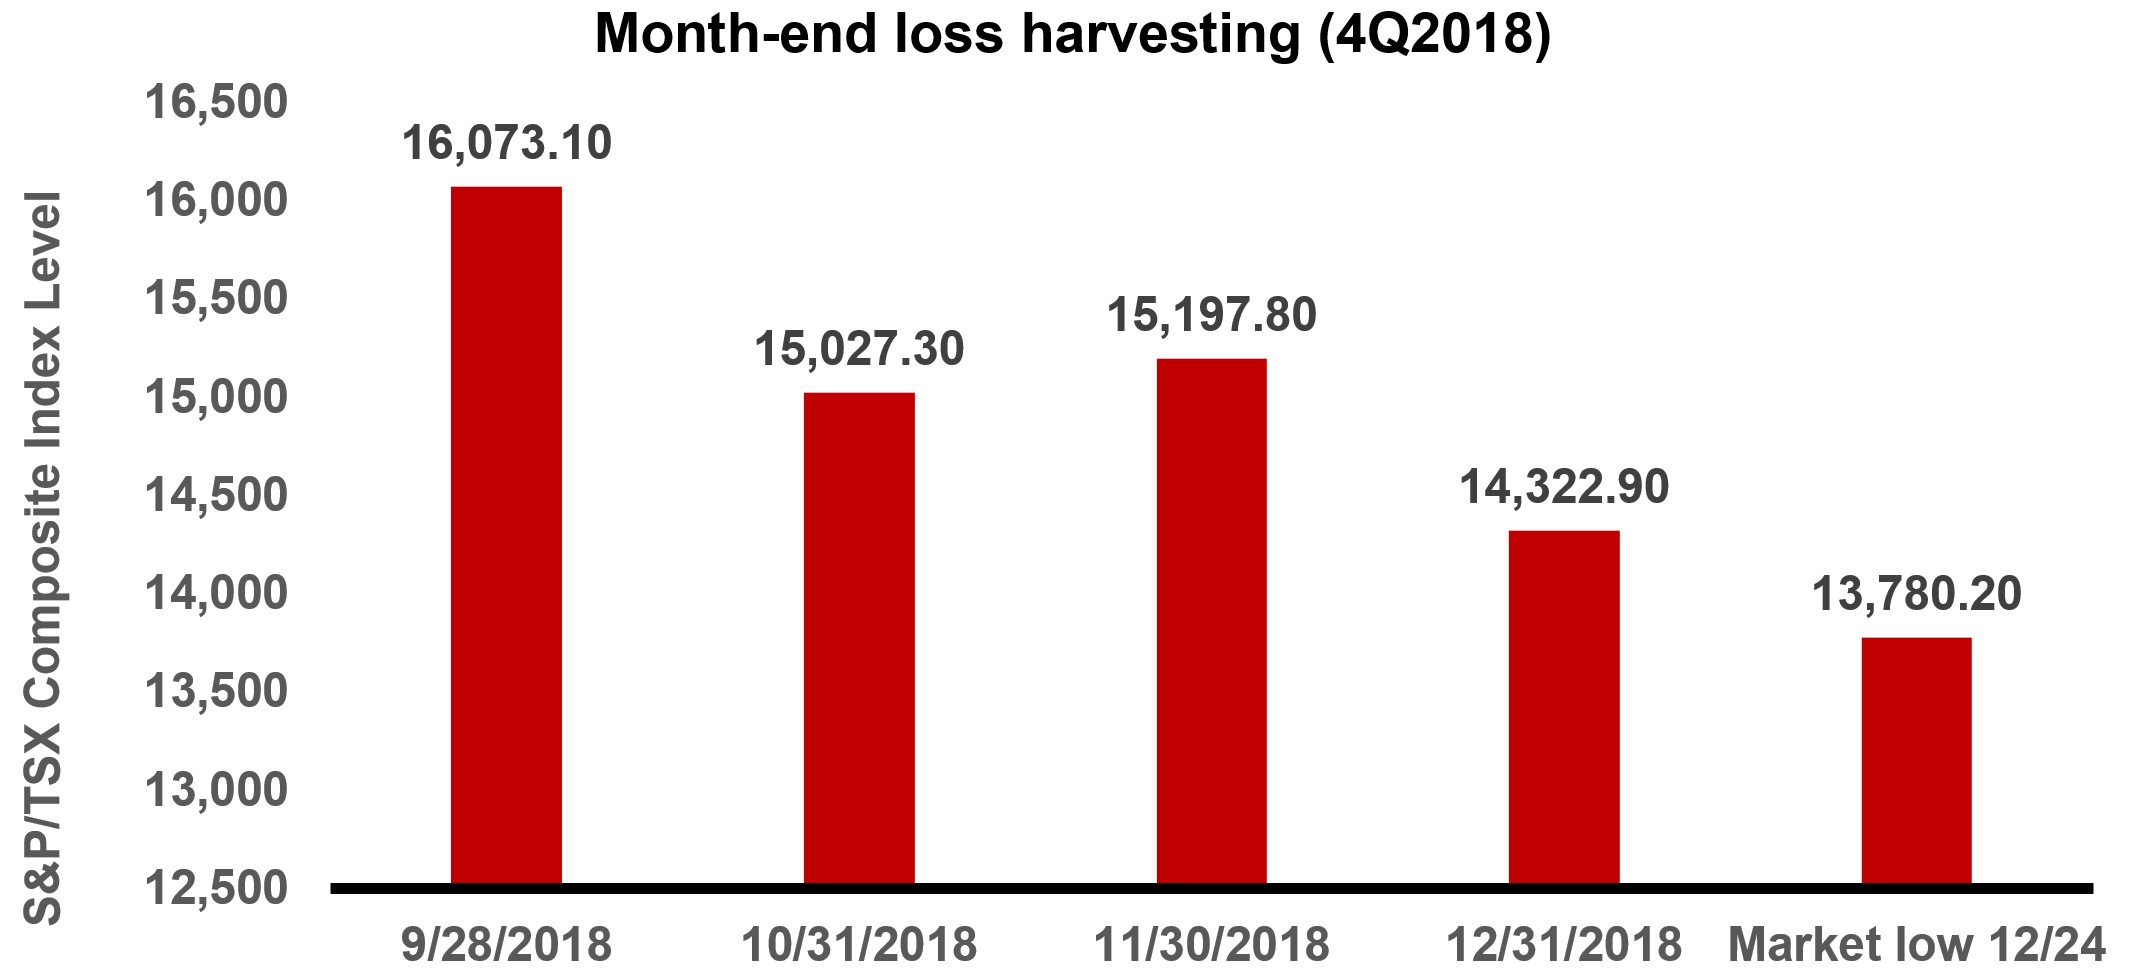 Month-end loss 2018